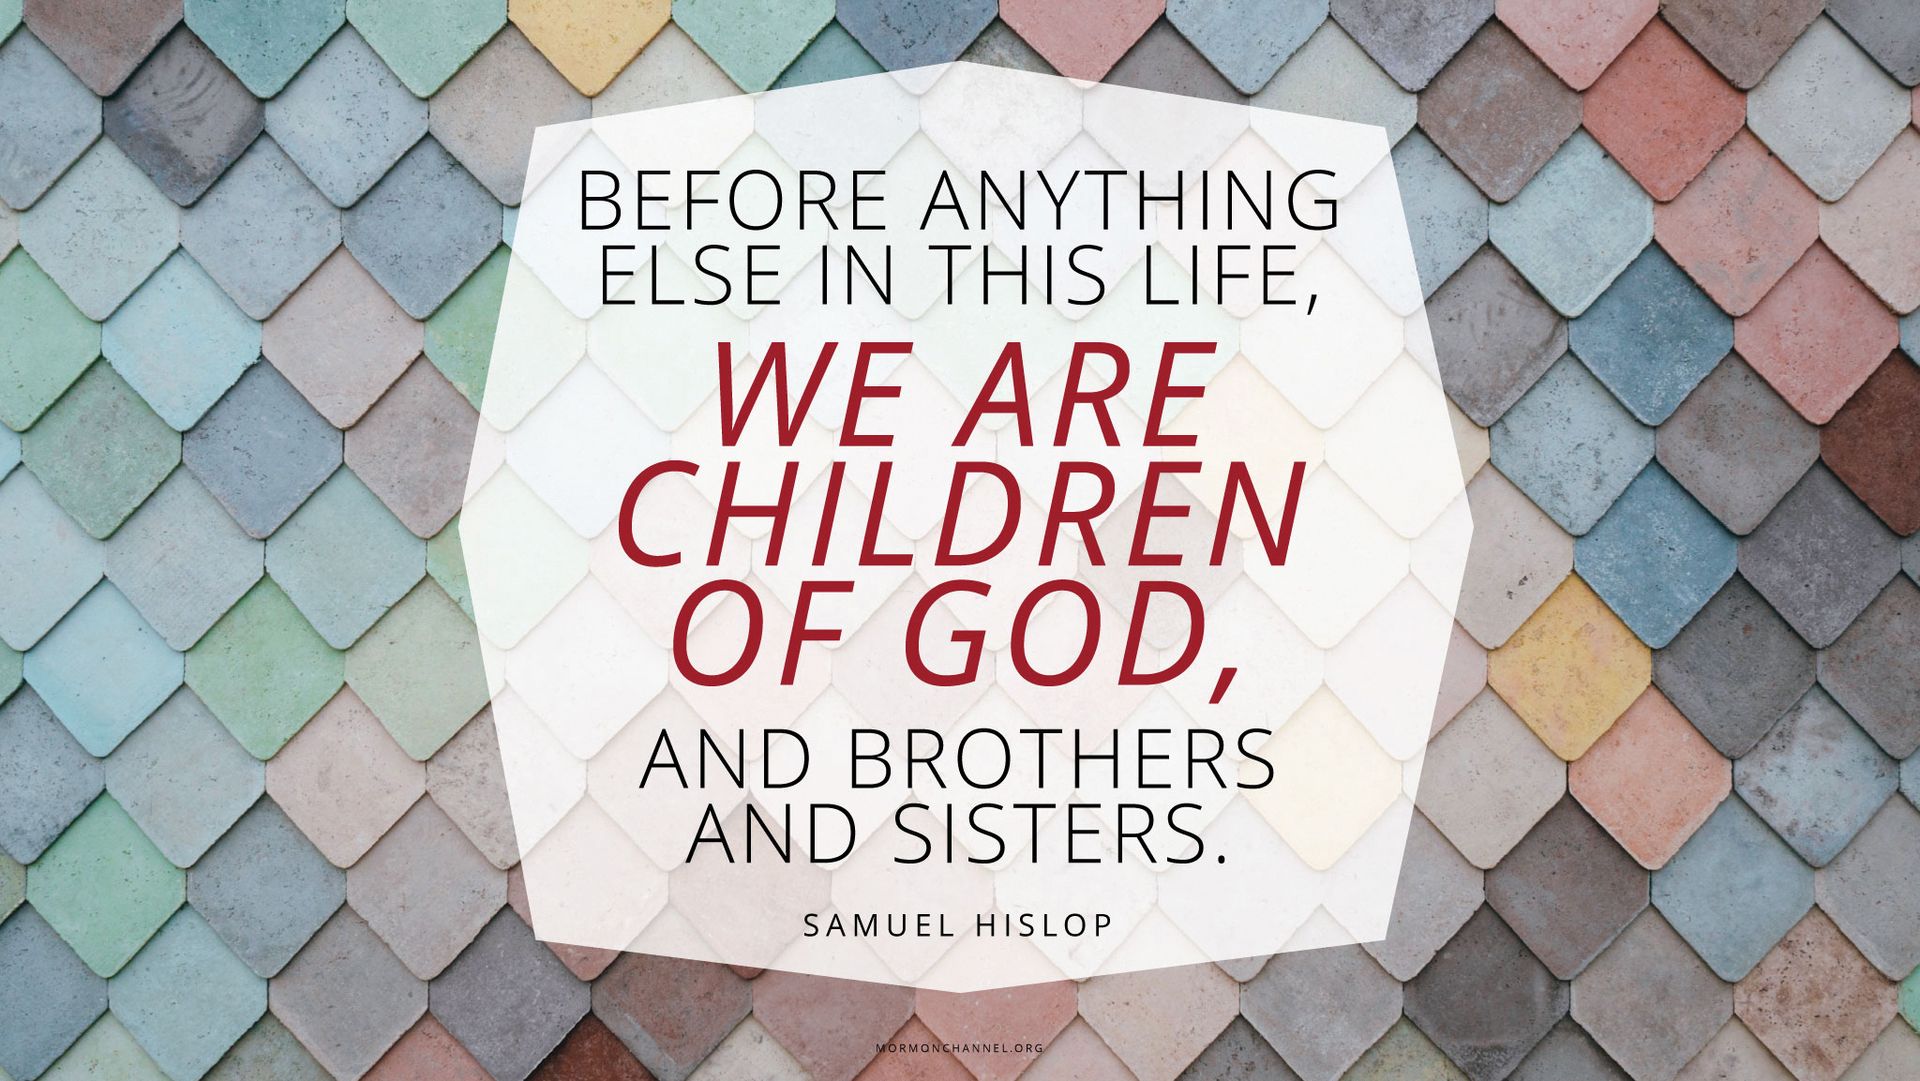 “Before anything else in this life, we are children of God, and brothers and sisters.”—Samuel Hislop © undefined ipCode 1.